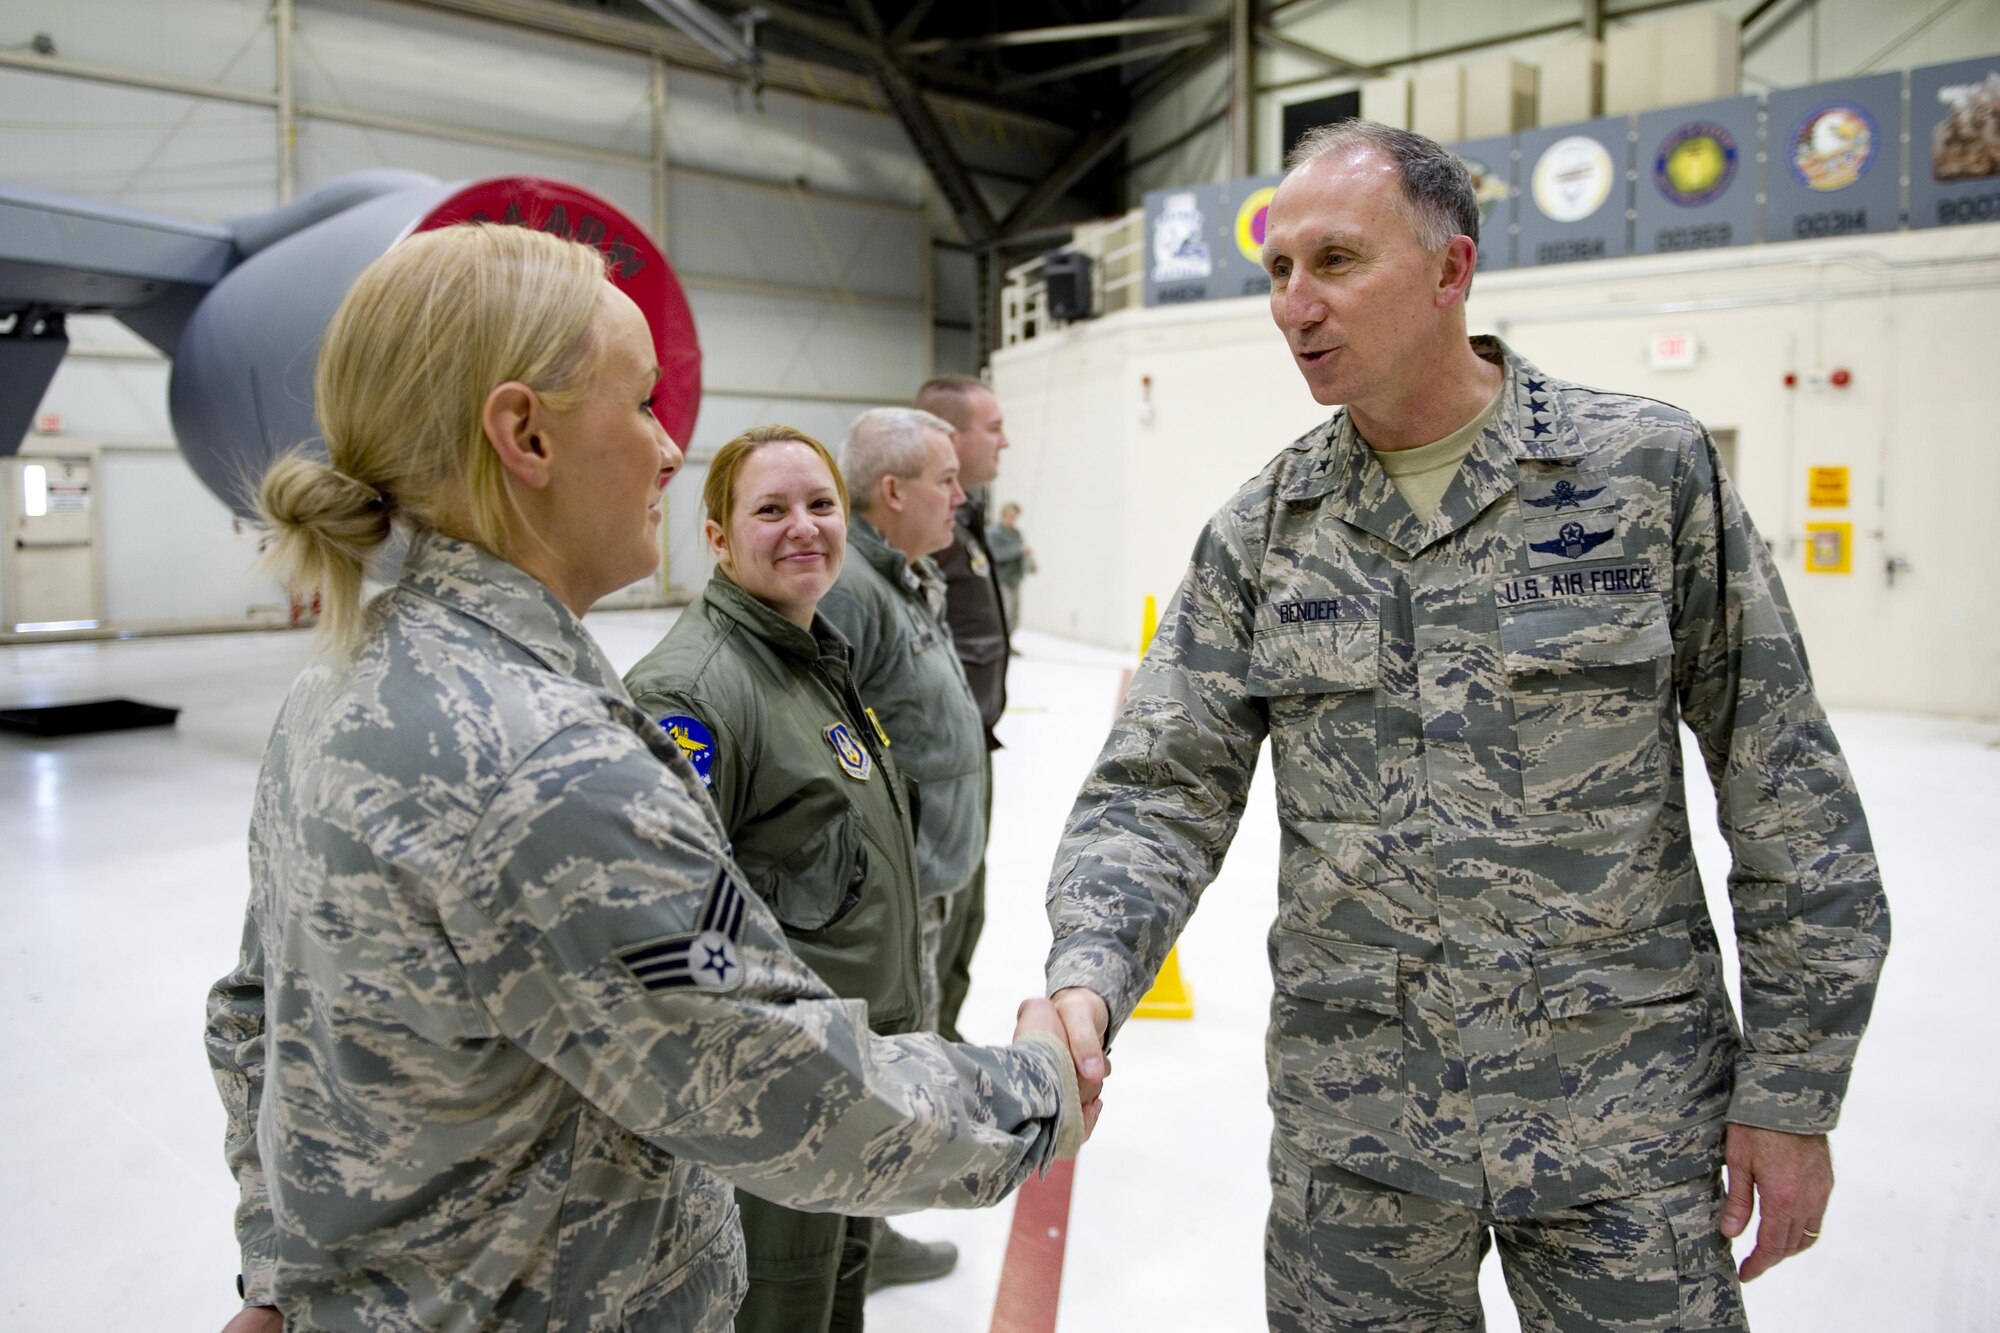 Lt. Gen. Bill Bender, Air Force chief of information dominance and chief information officer, shakes hands with Senior Airman Caroline Taylor, 434th Aircraft Maintenance crew chief, and other KC-135 Stratotanker aircrew during a visit to Grissom Air Reserve Base, Ind., Jan. 14, 2016. During the visit, Bender had an opportunity to speak with Airmen about cyber security concerns and explain how Grissom was leading the way through a new cyber security pilot program. (U.S. Air Force photo/Tech. Sgt. Benjamin Mota)